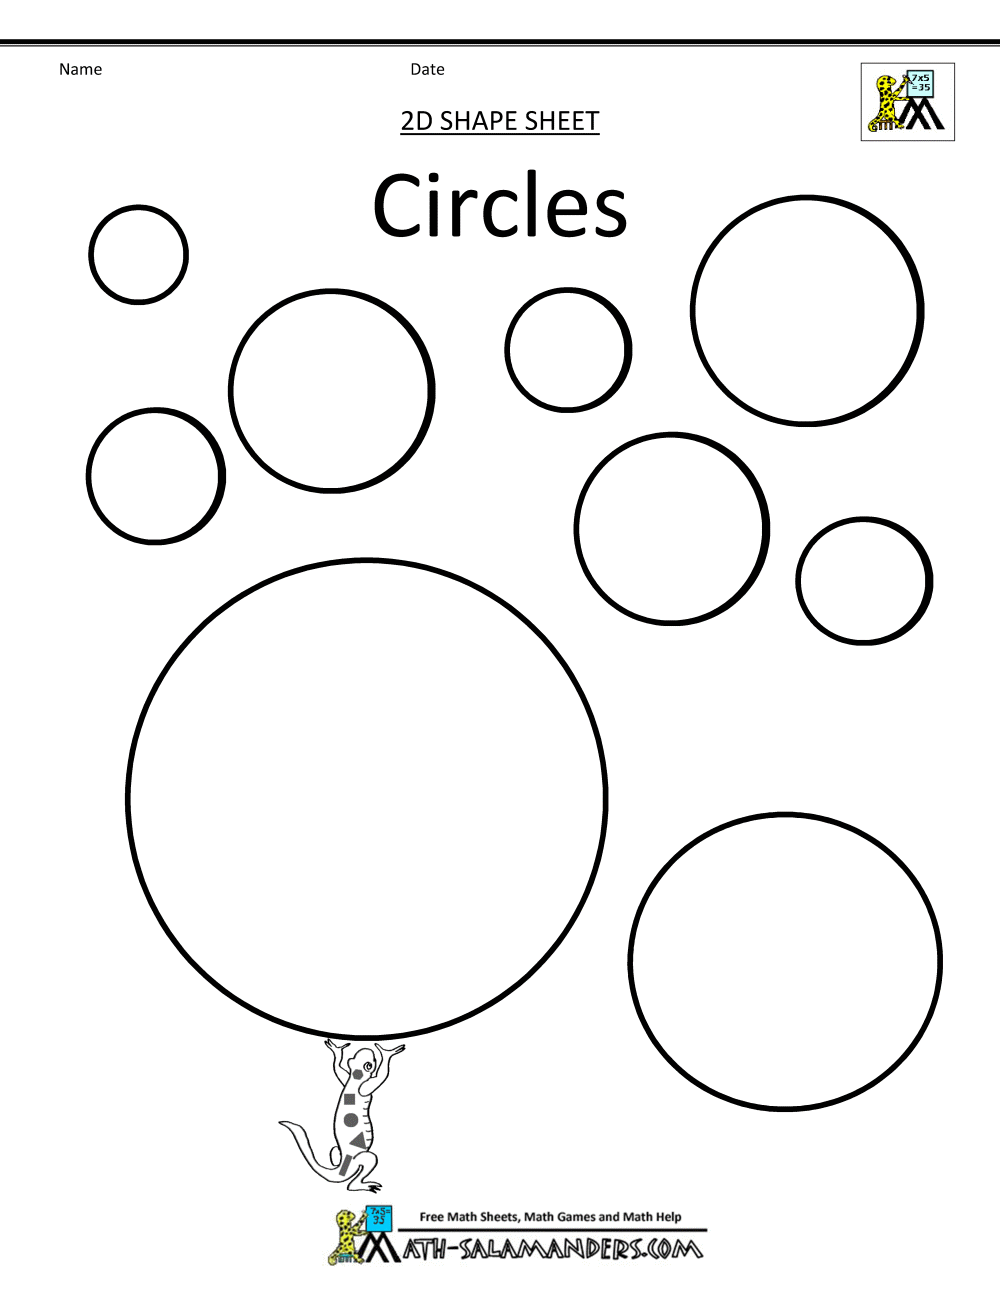 circle coloring page shapes clipart basic 2d shapes coloring page circle 